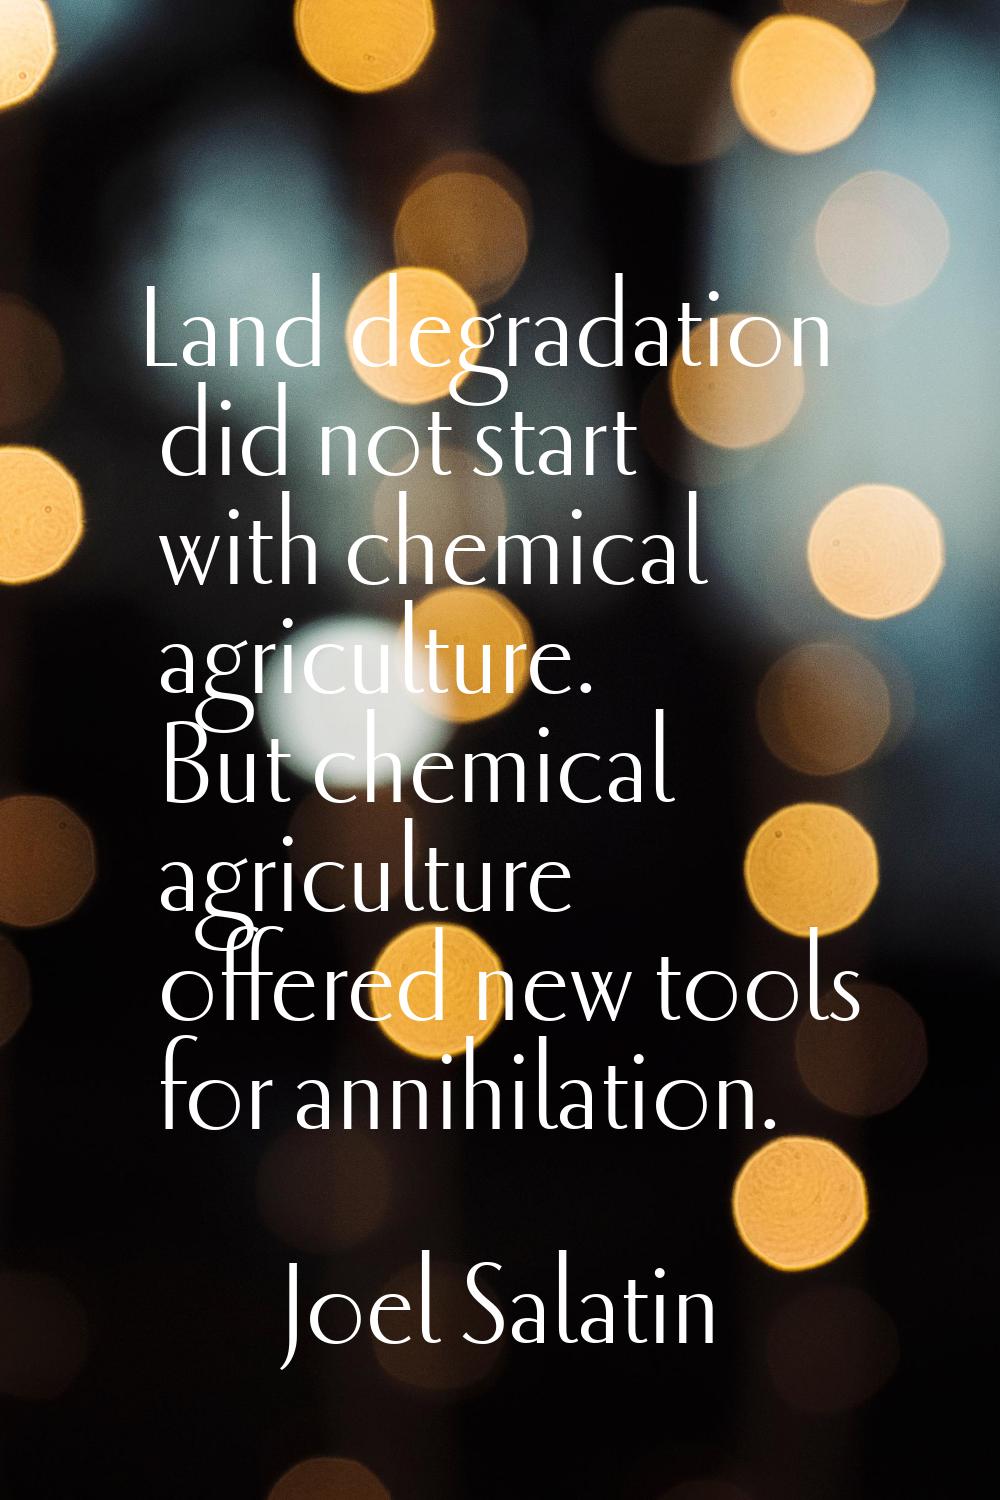 Land degradation did not start with chemical agriculture. But chemical agriculture offered new tool